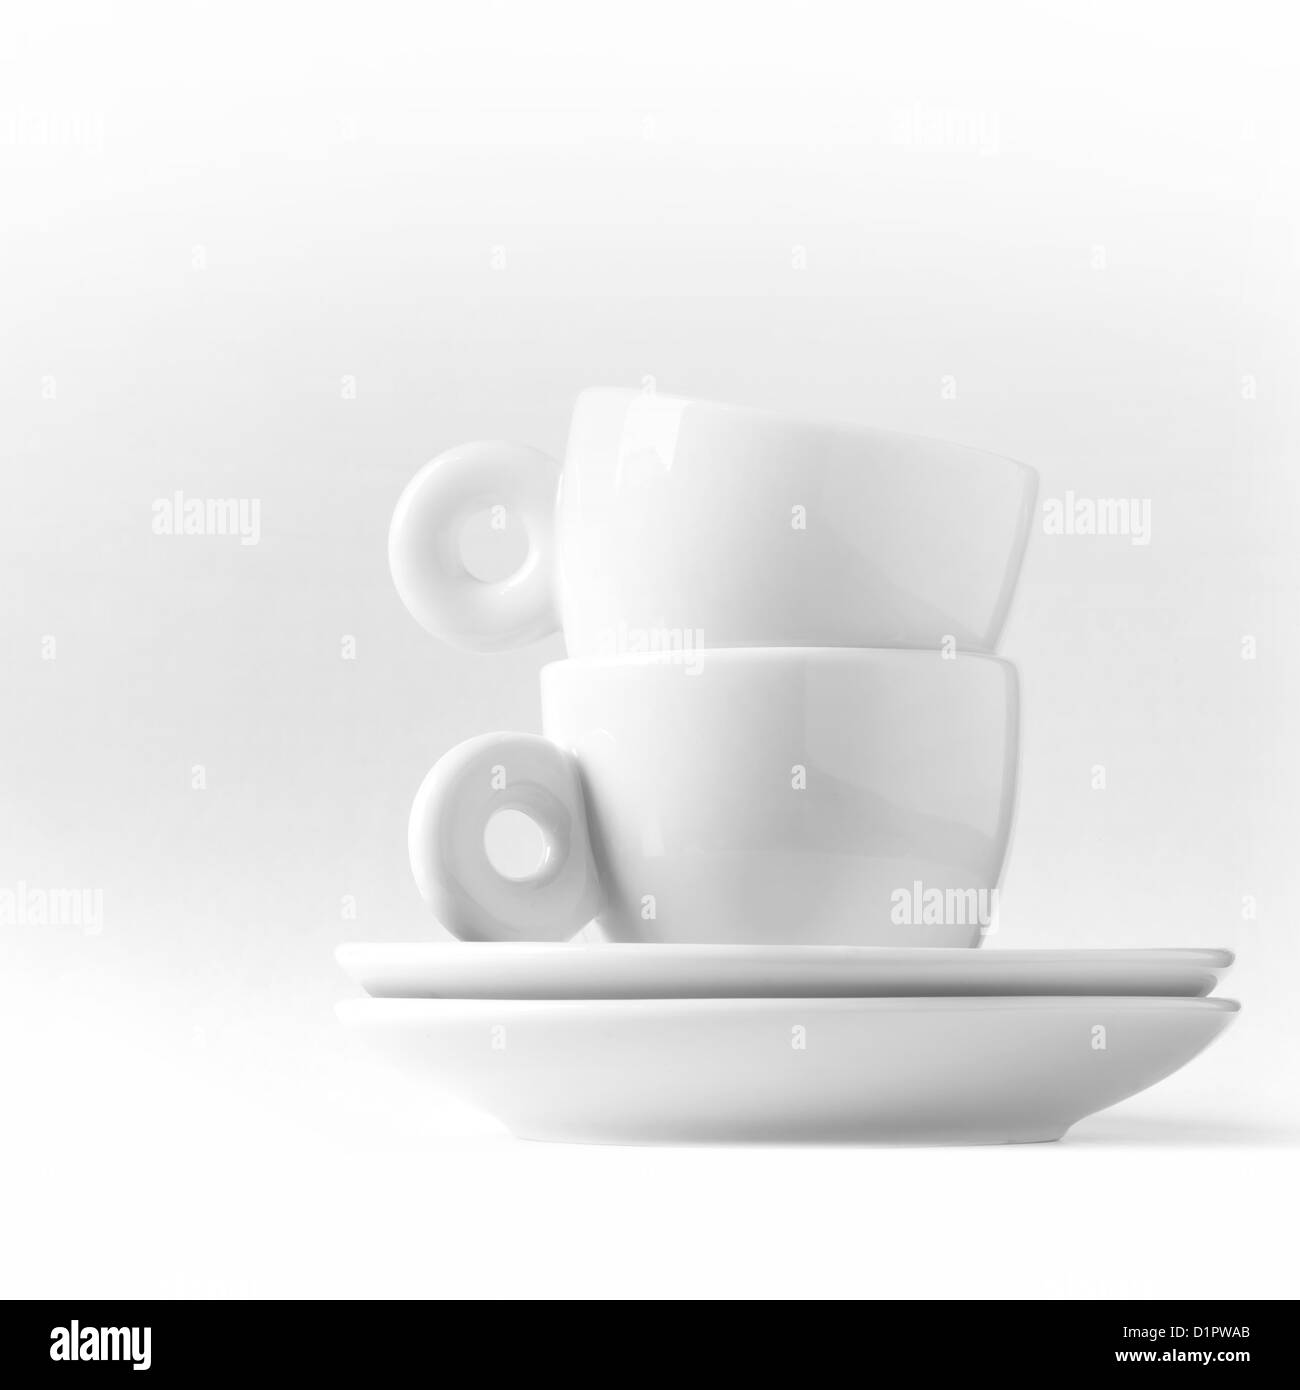 Double espresso metaphor with two small white cups Stock Photo